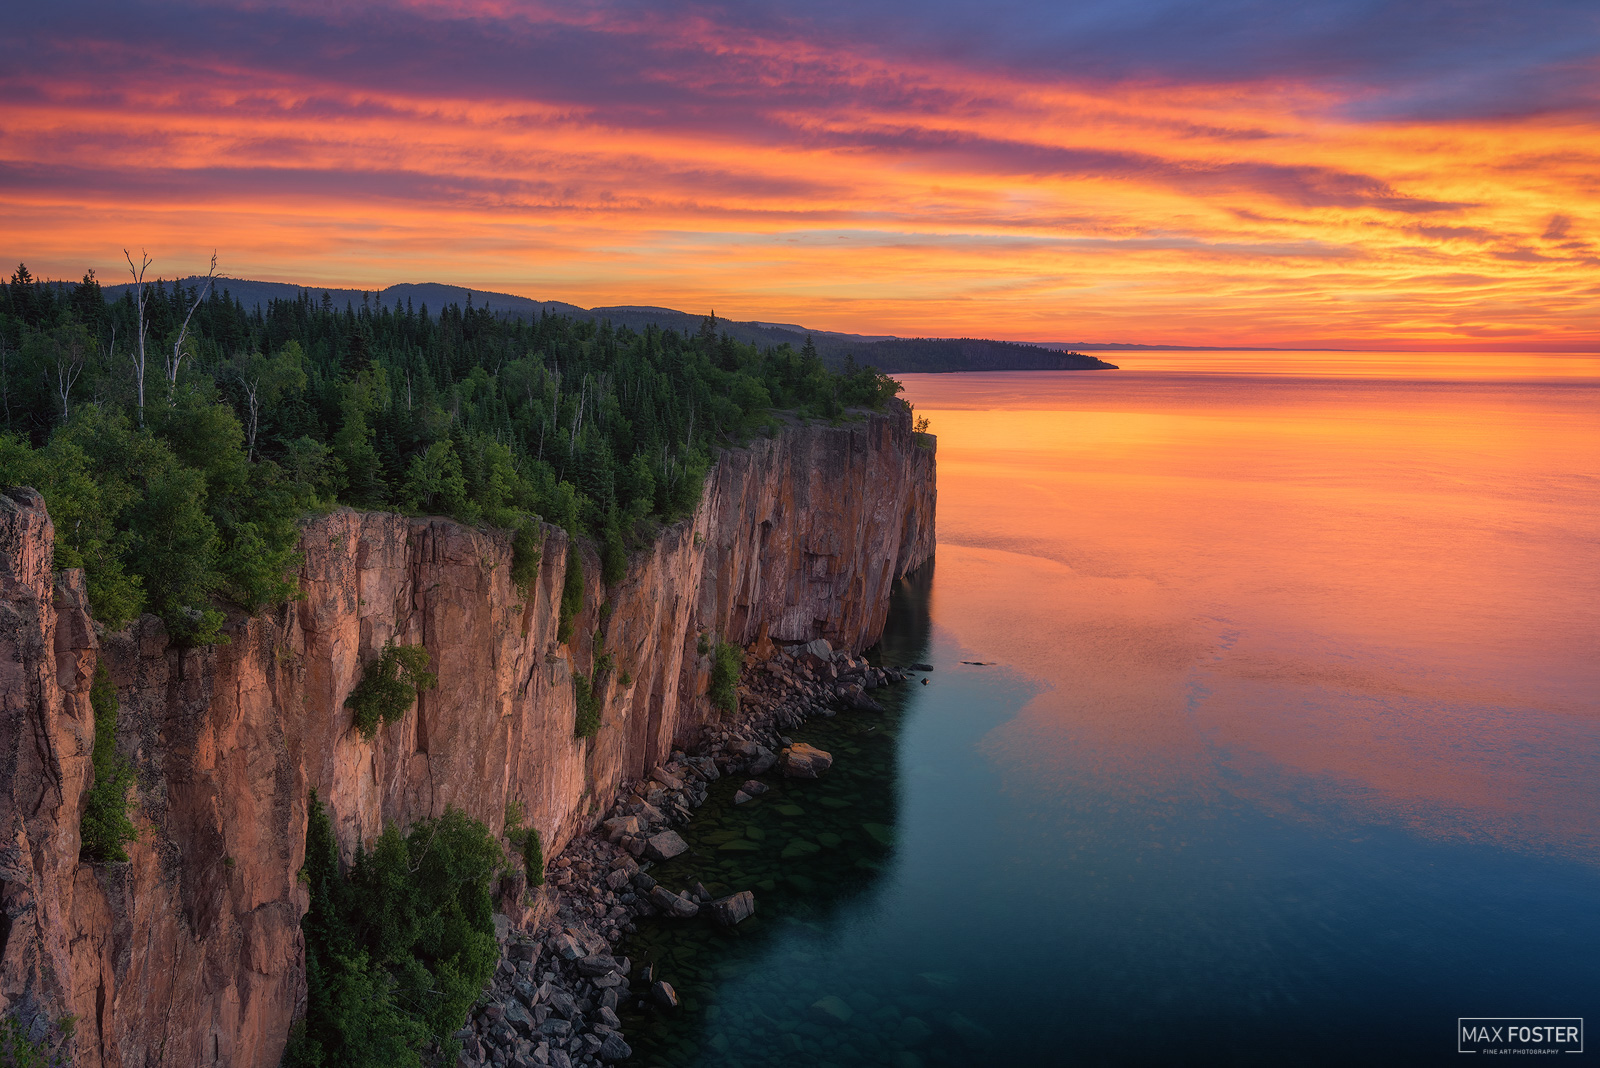 Refresh your space with Vertical Endeavors, Max Foster's limited edition photography print of Palisade Head on Lake Superior...